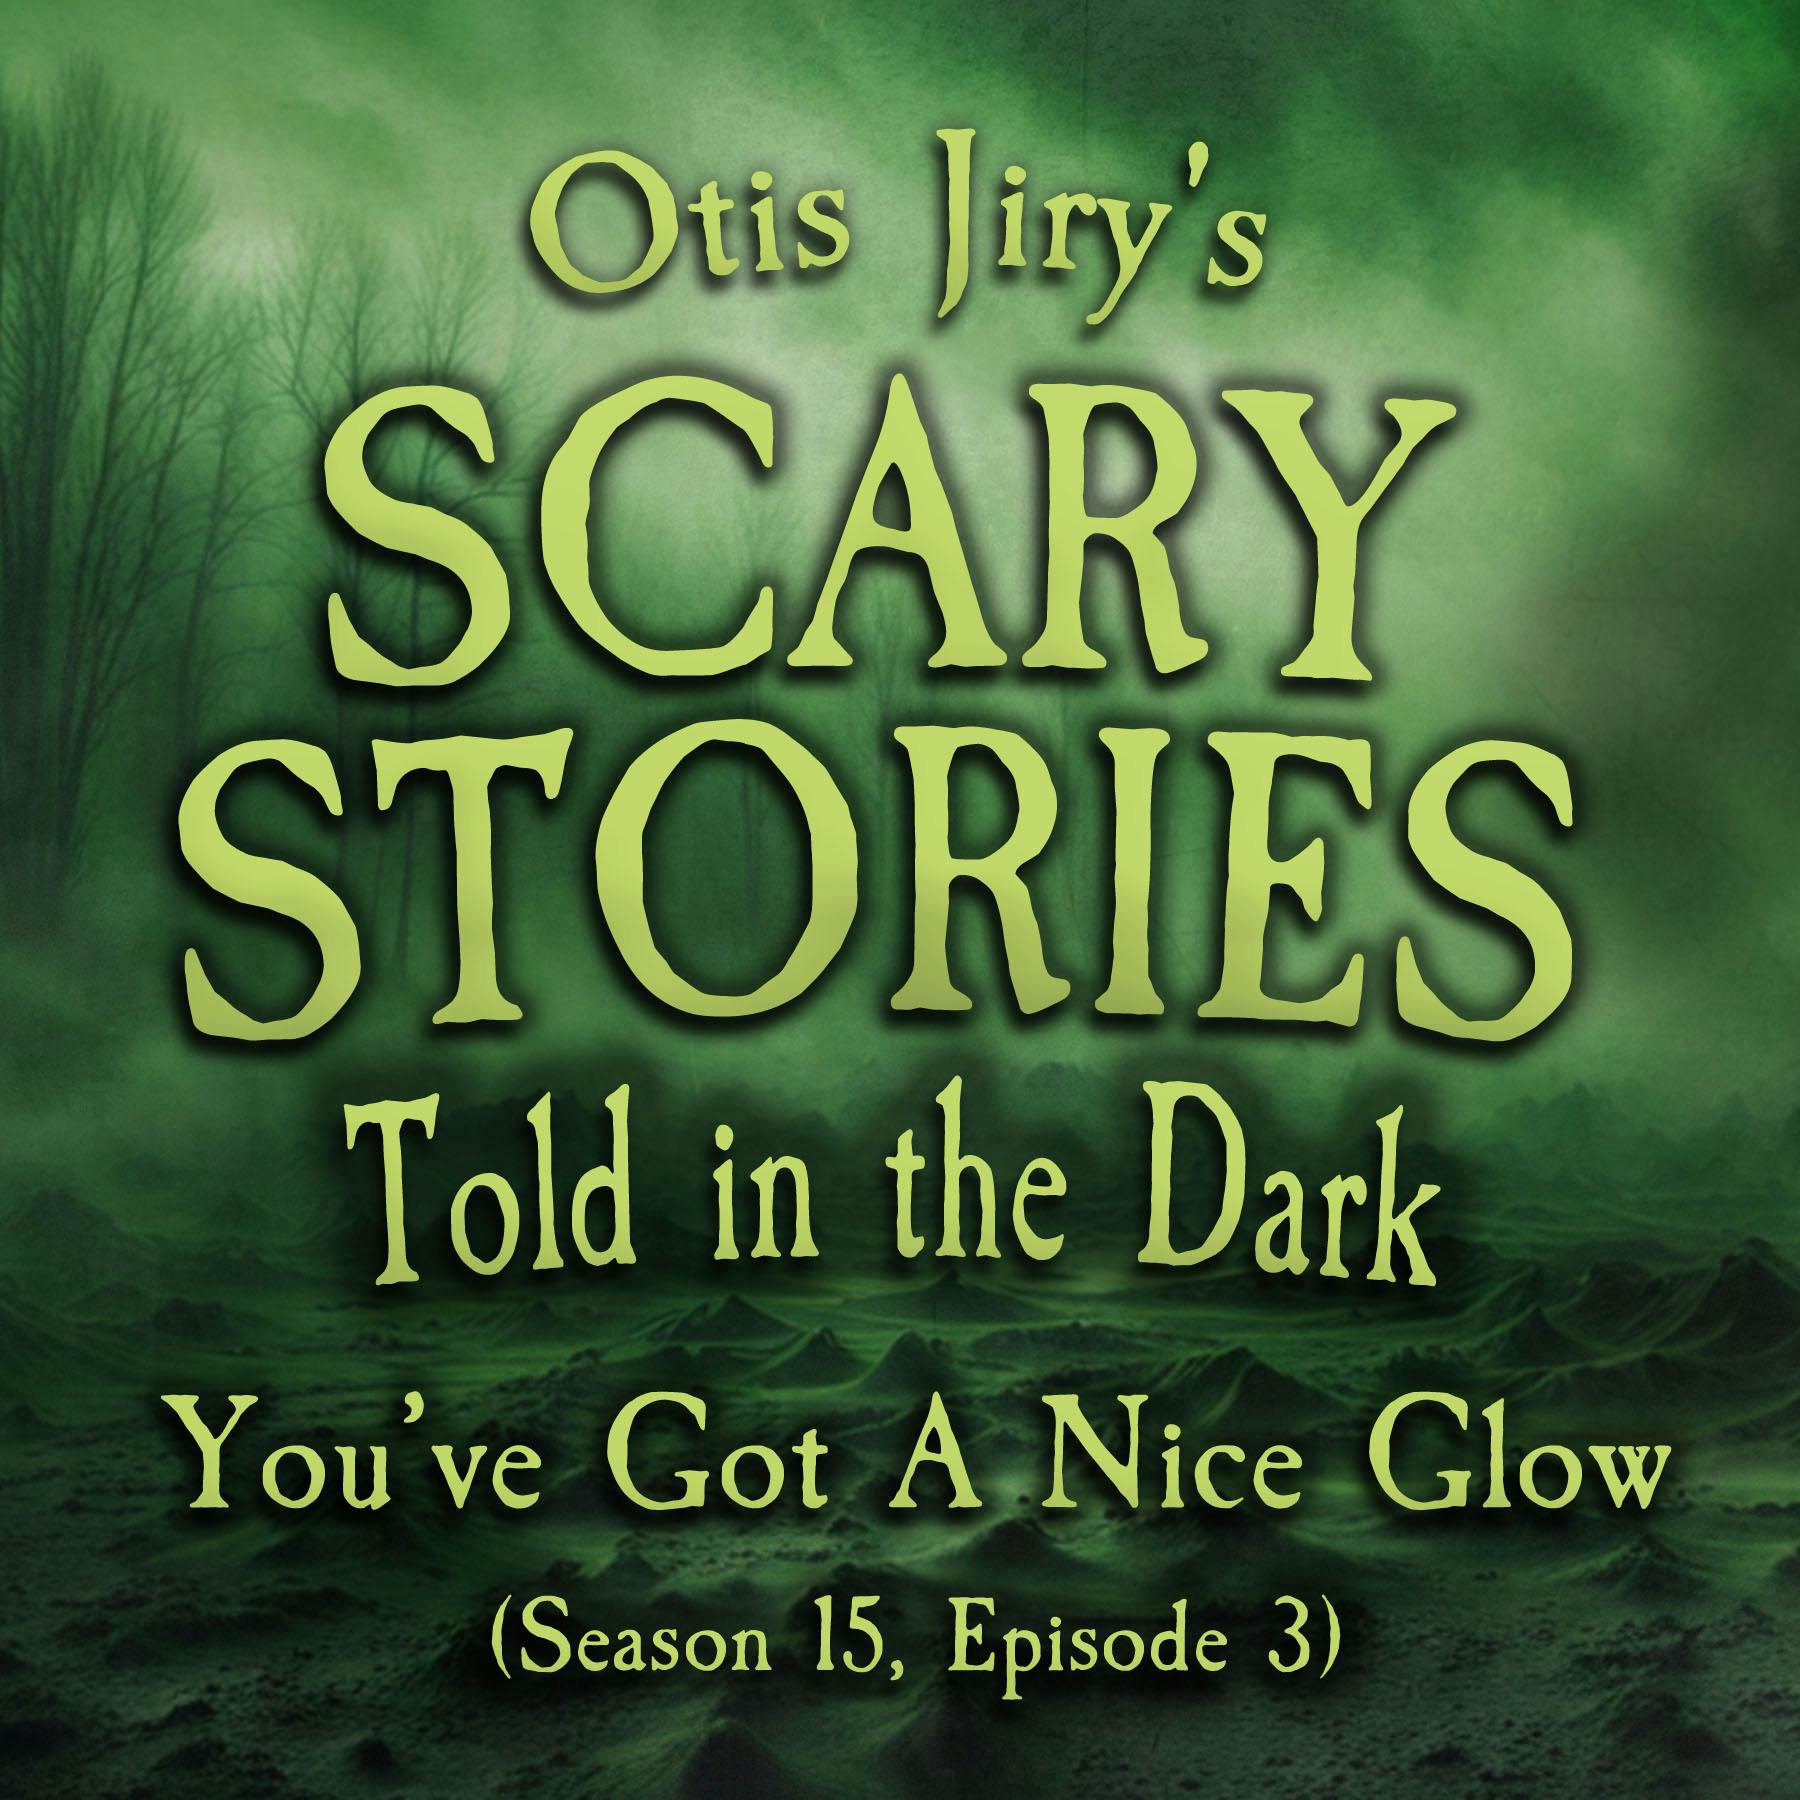 S15E03 - "You've Got a Nice Glow" – Scary Stories Told in the Dark